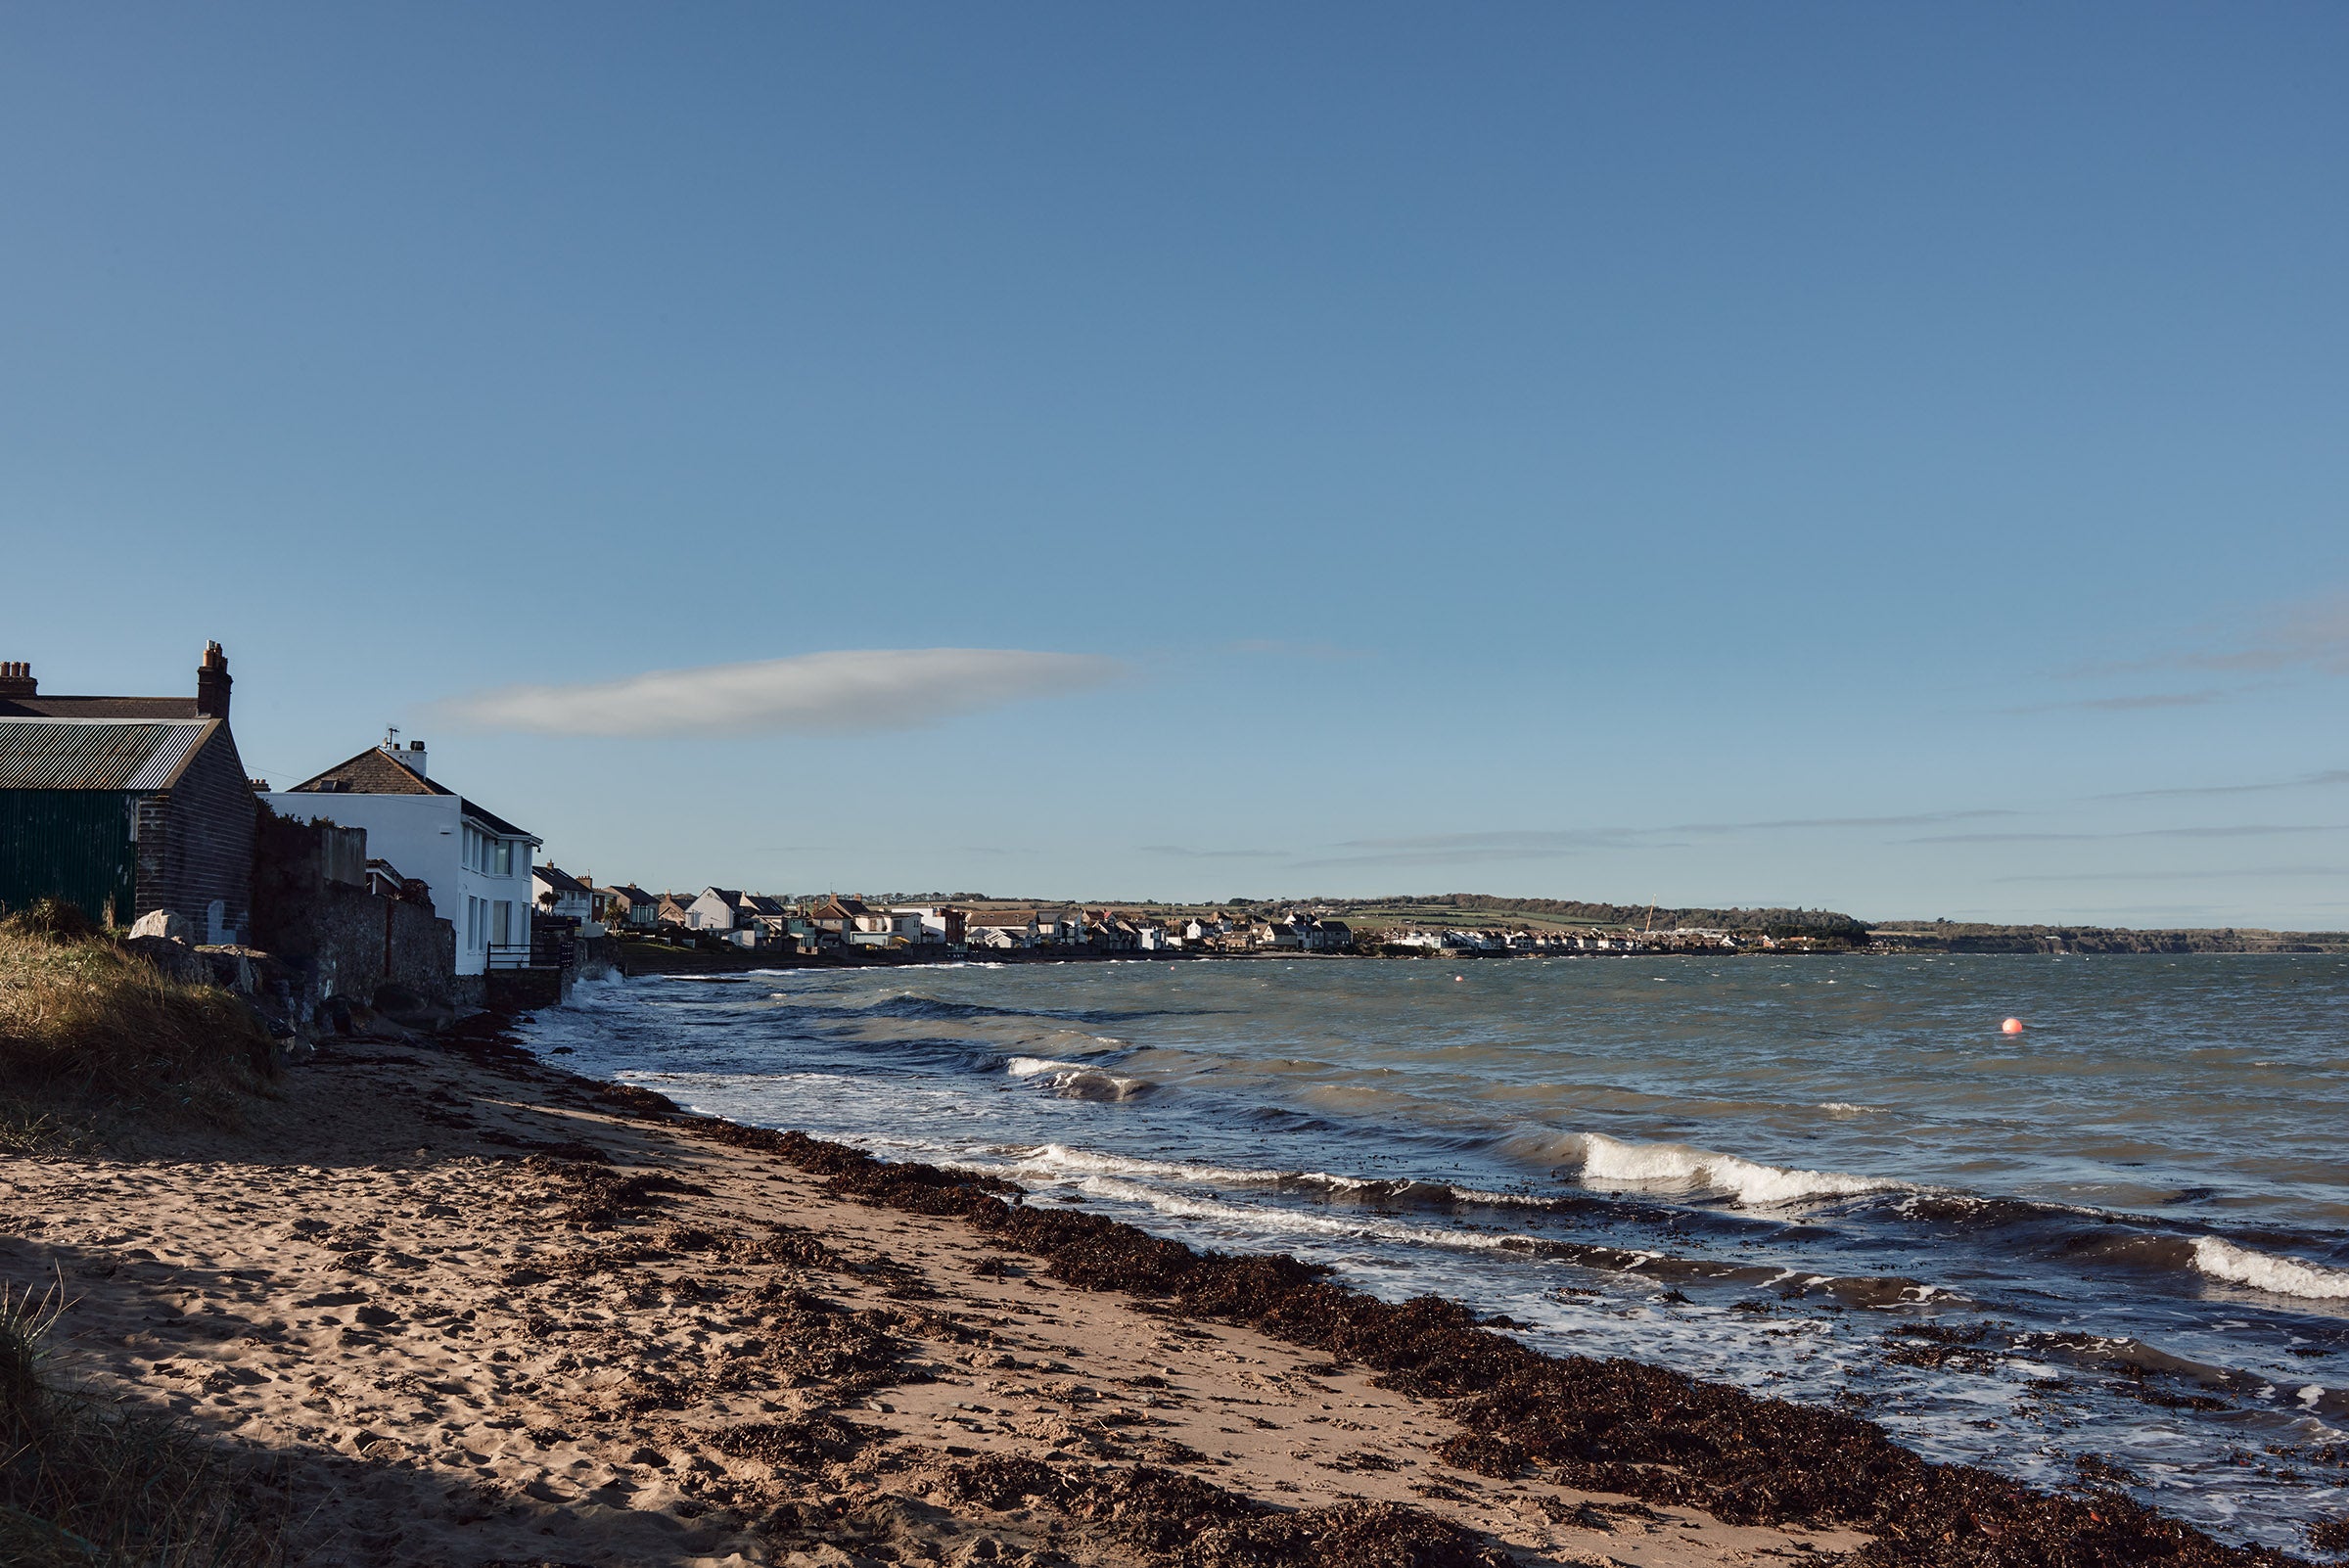 View of the beachfront at Skerries in Dublin.